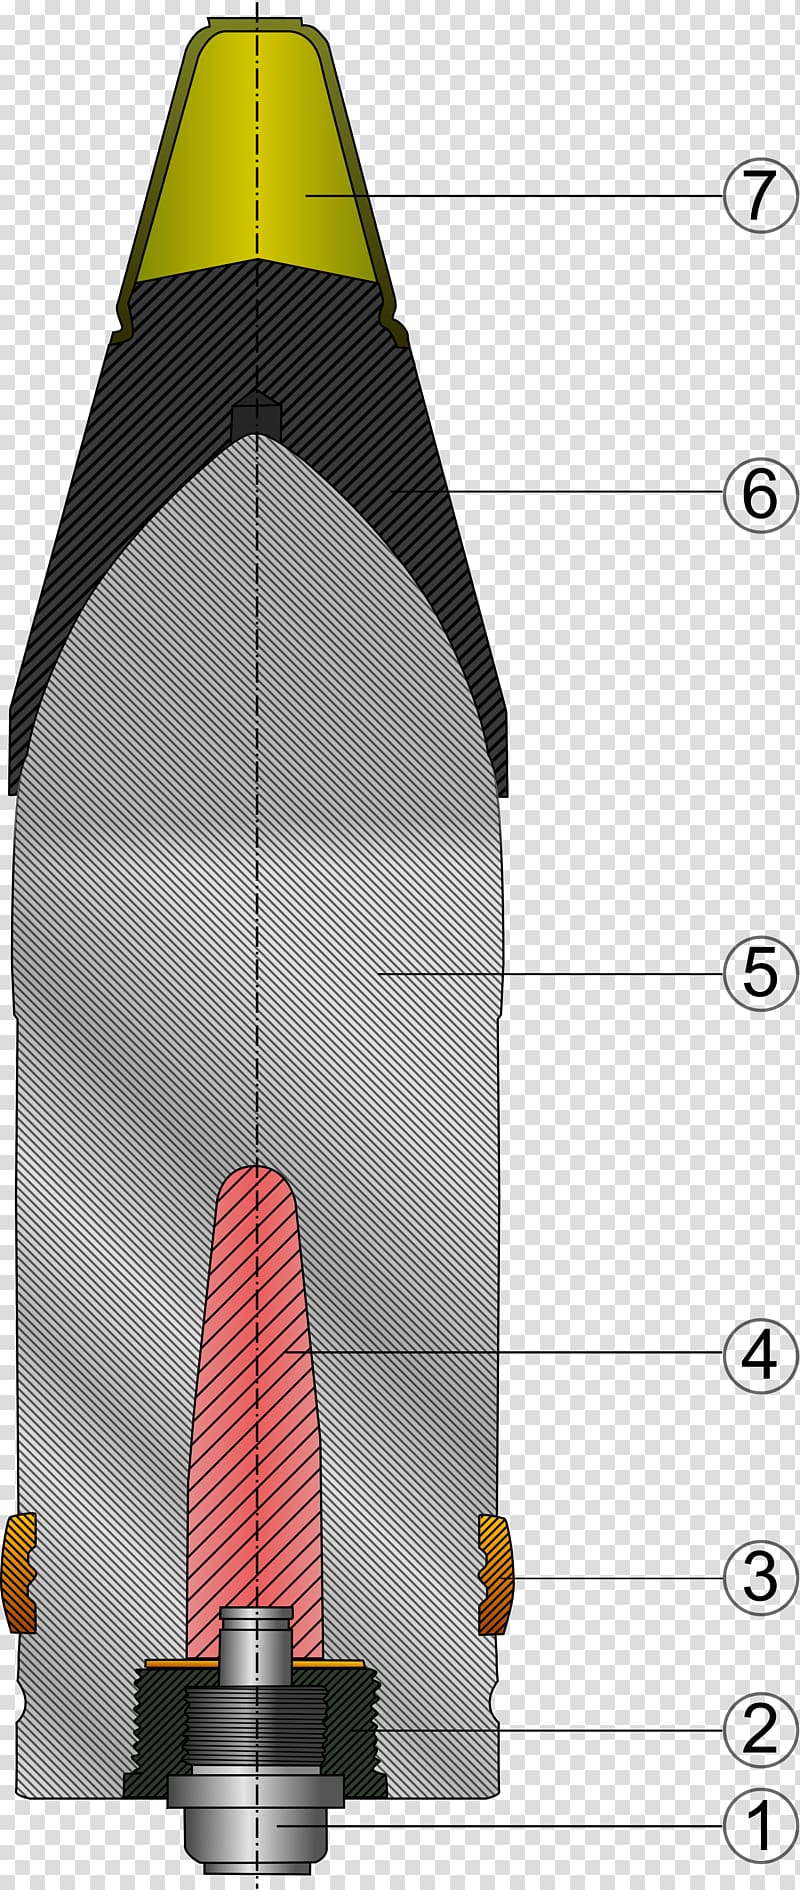 Panzergranate 39 Armor-piercing shell Artillery fuze Kinetic energy penetrator, Shell transparent background PNG clipart